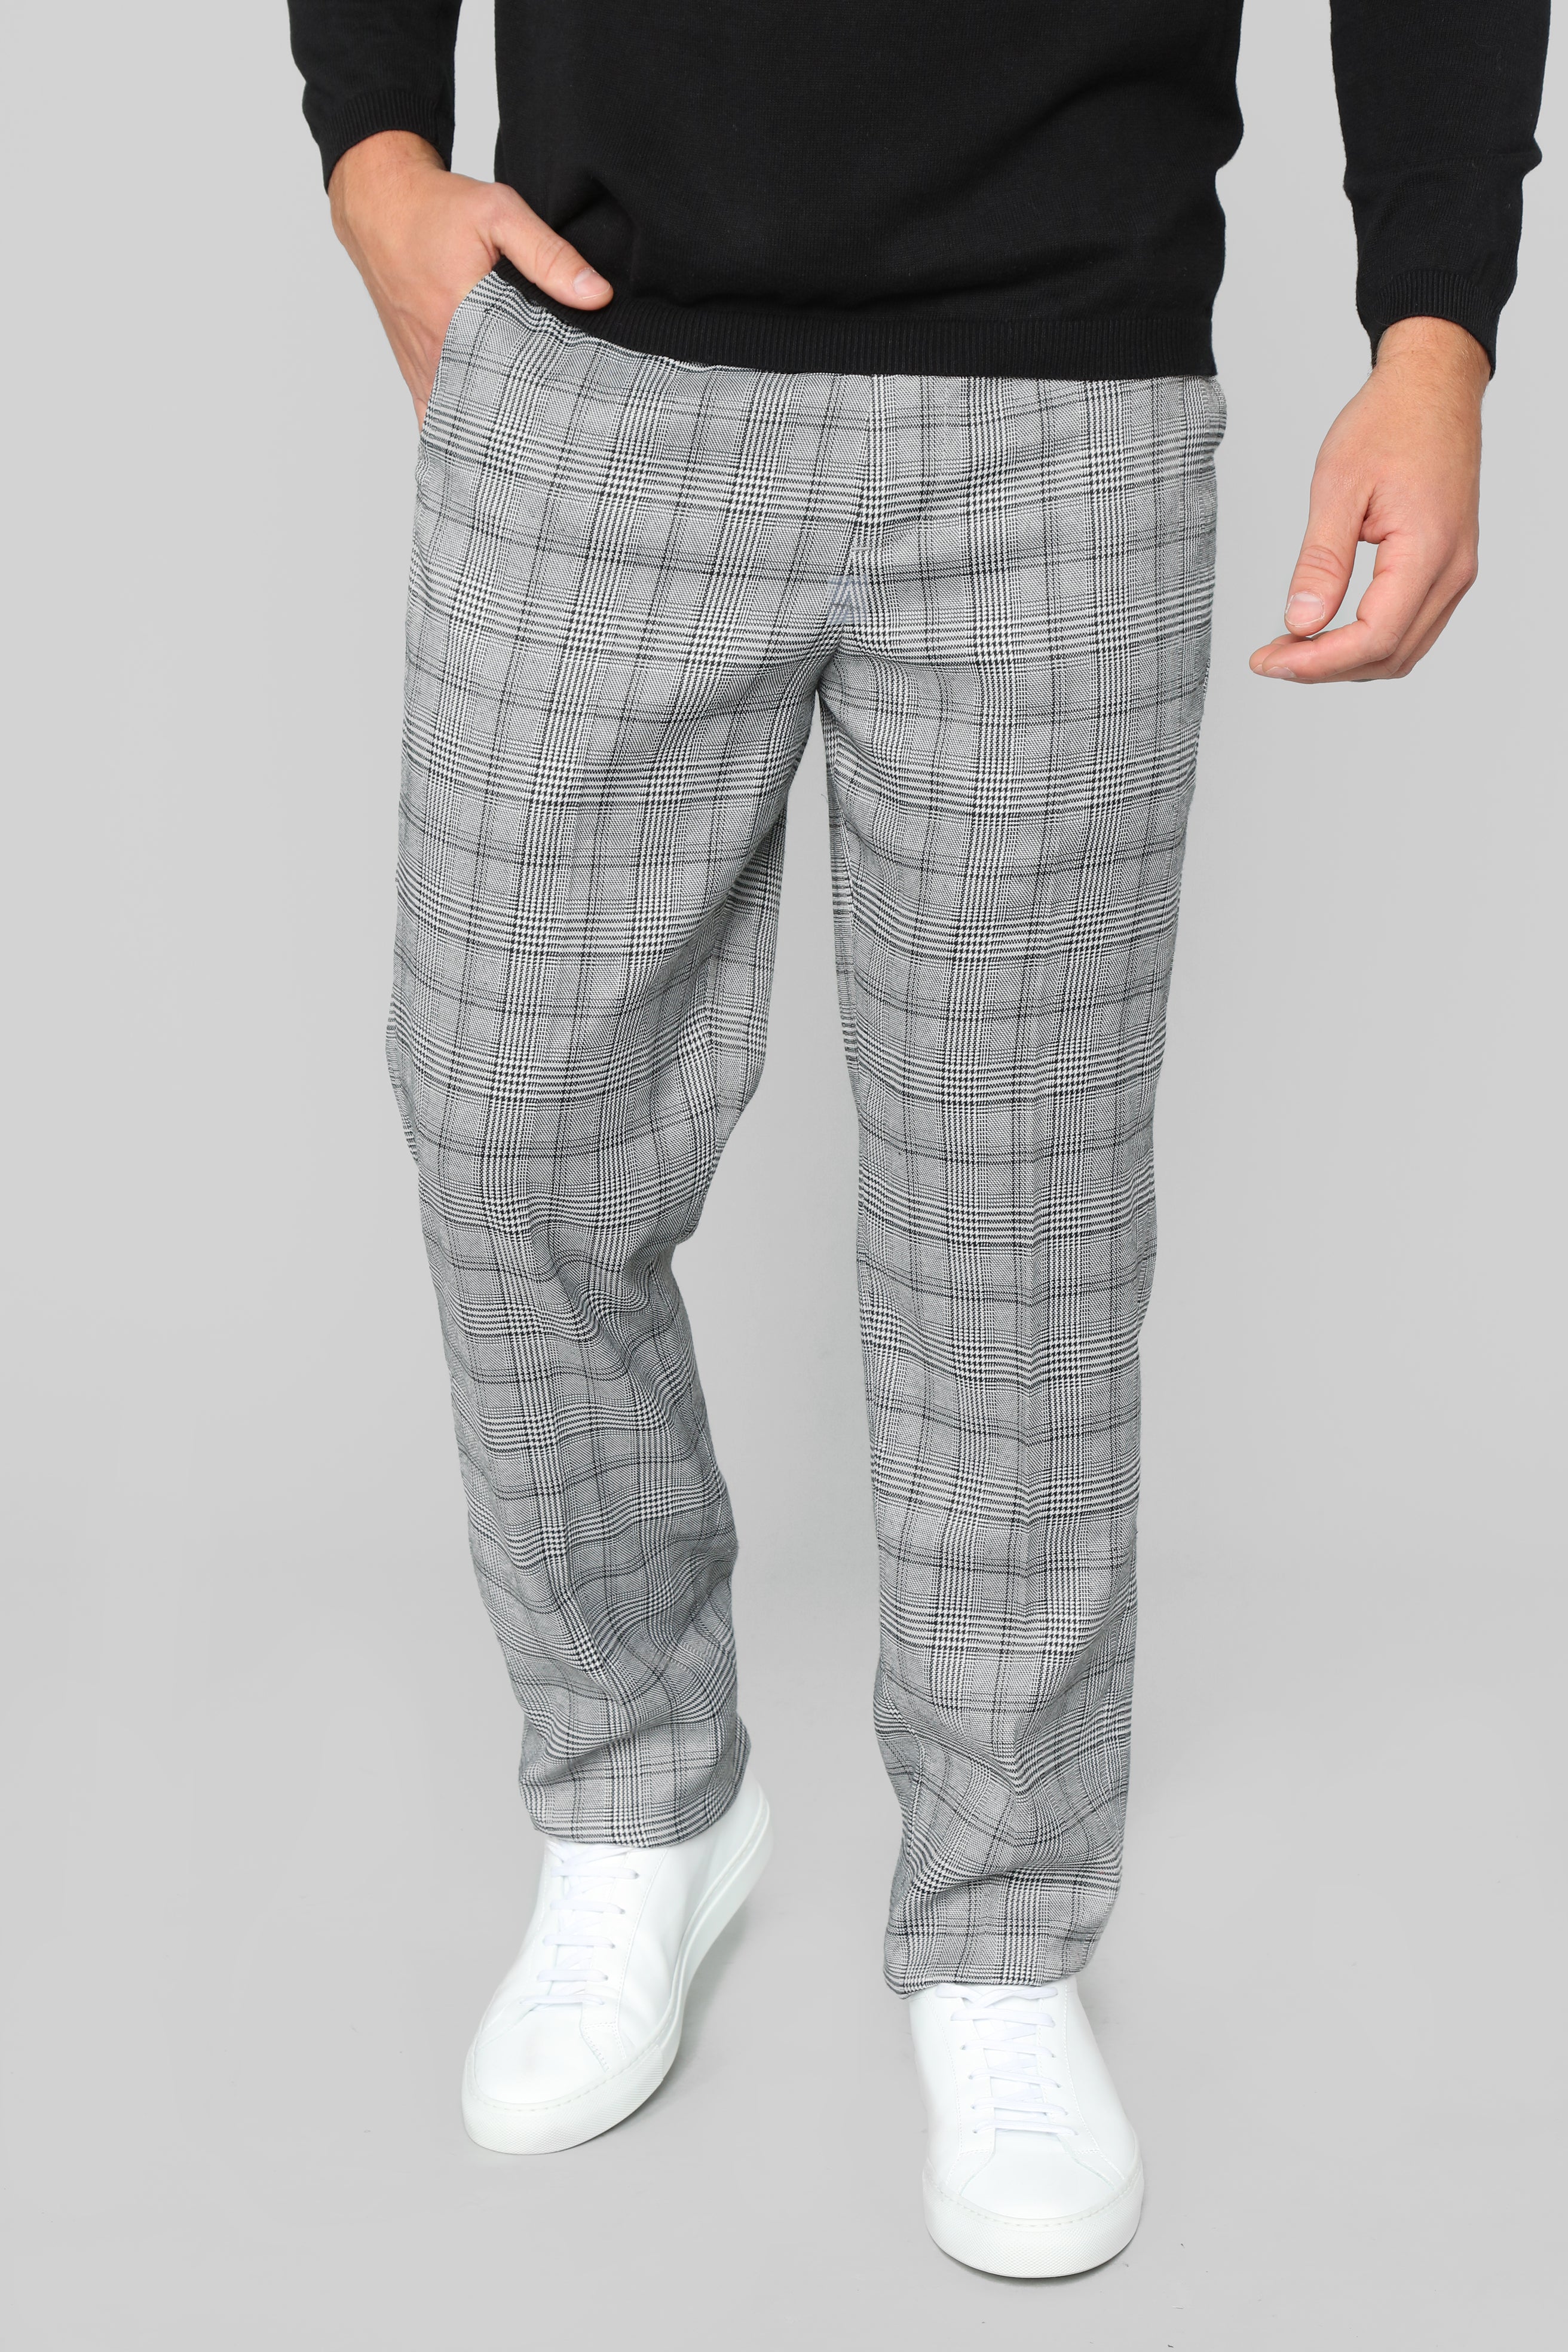 Brown Slim Fit Plaid Pants for Men by GentWith  Worldwide Shipping